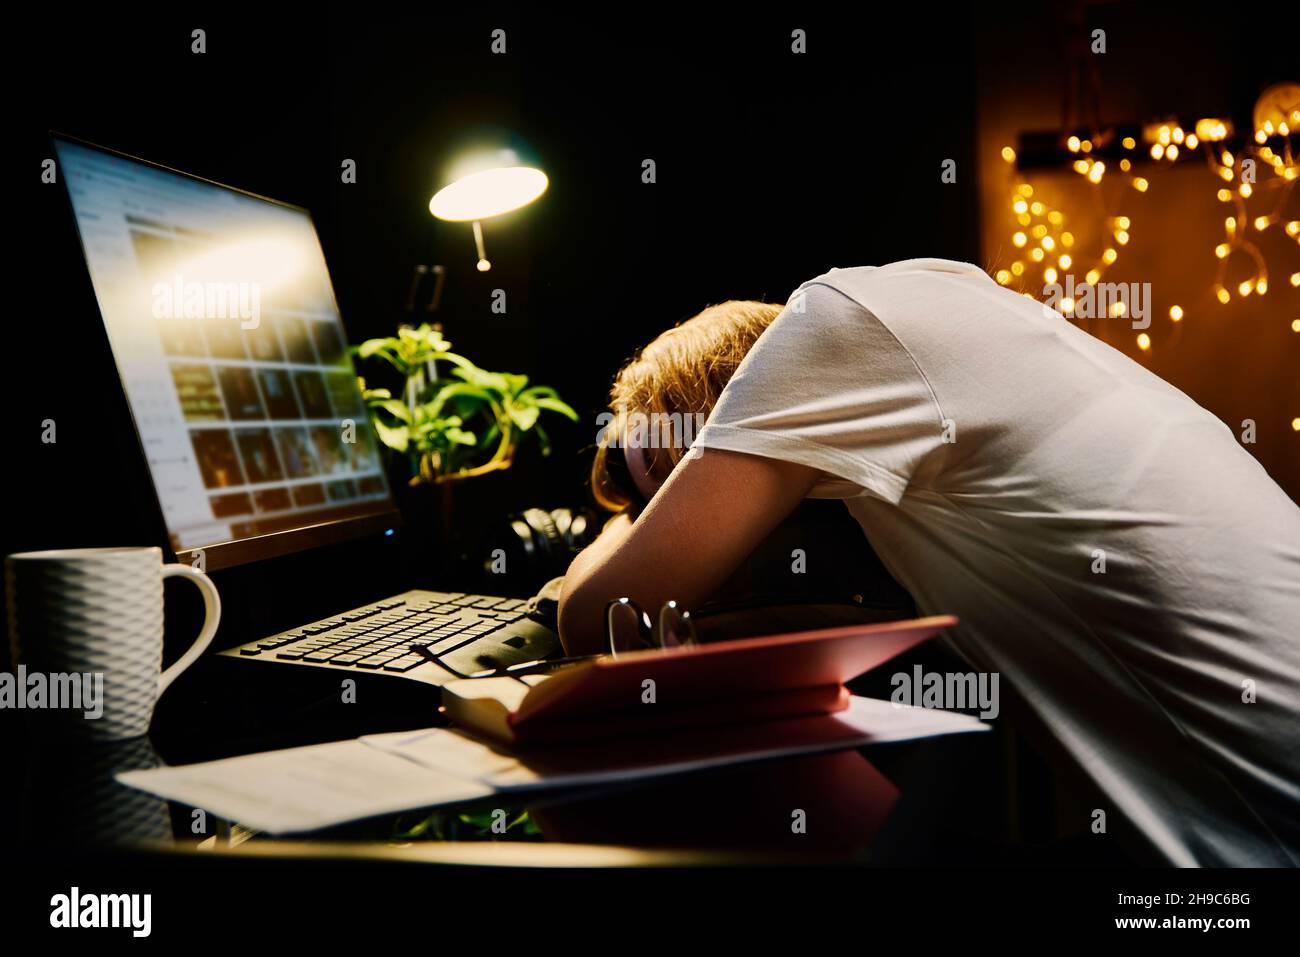 Woman sleeping on table at workplace. Overtime work concept. Working at night Stock Photo